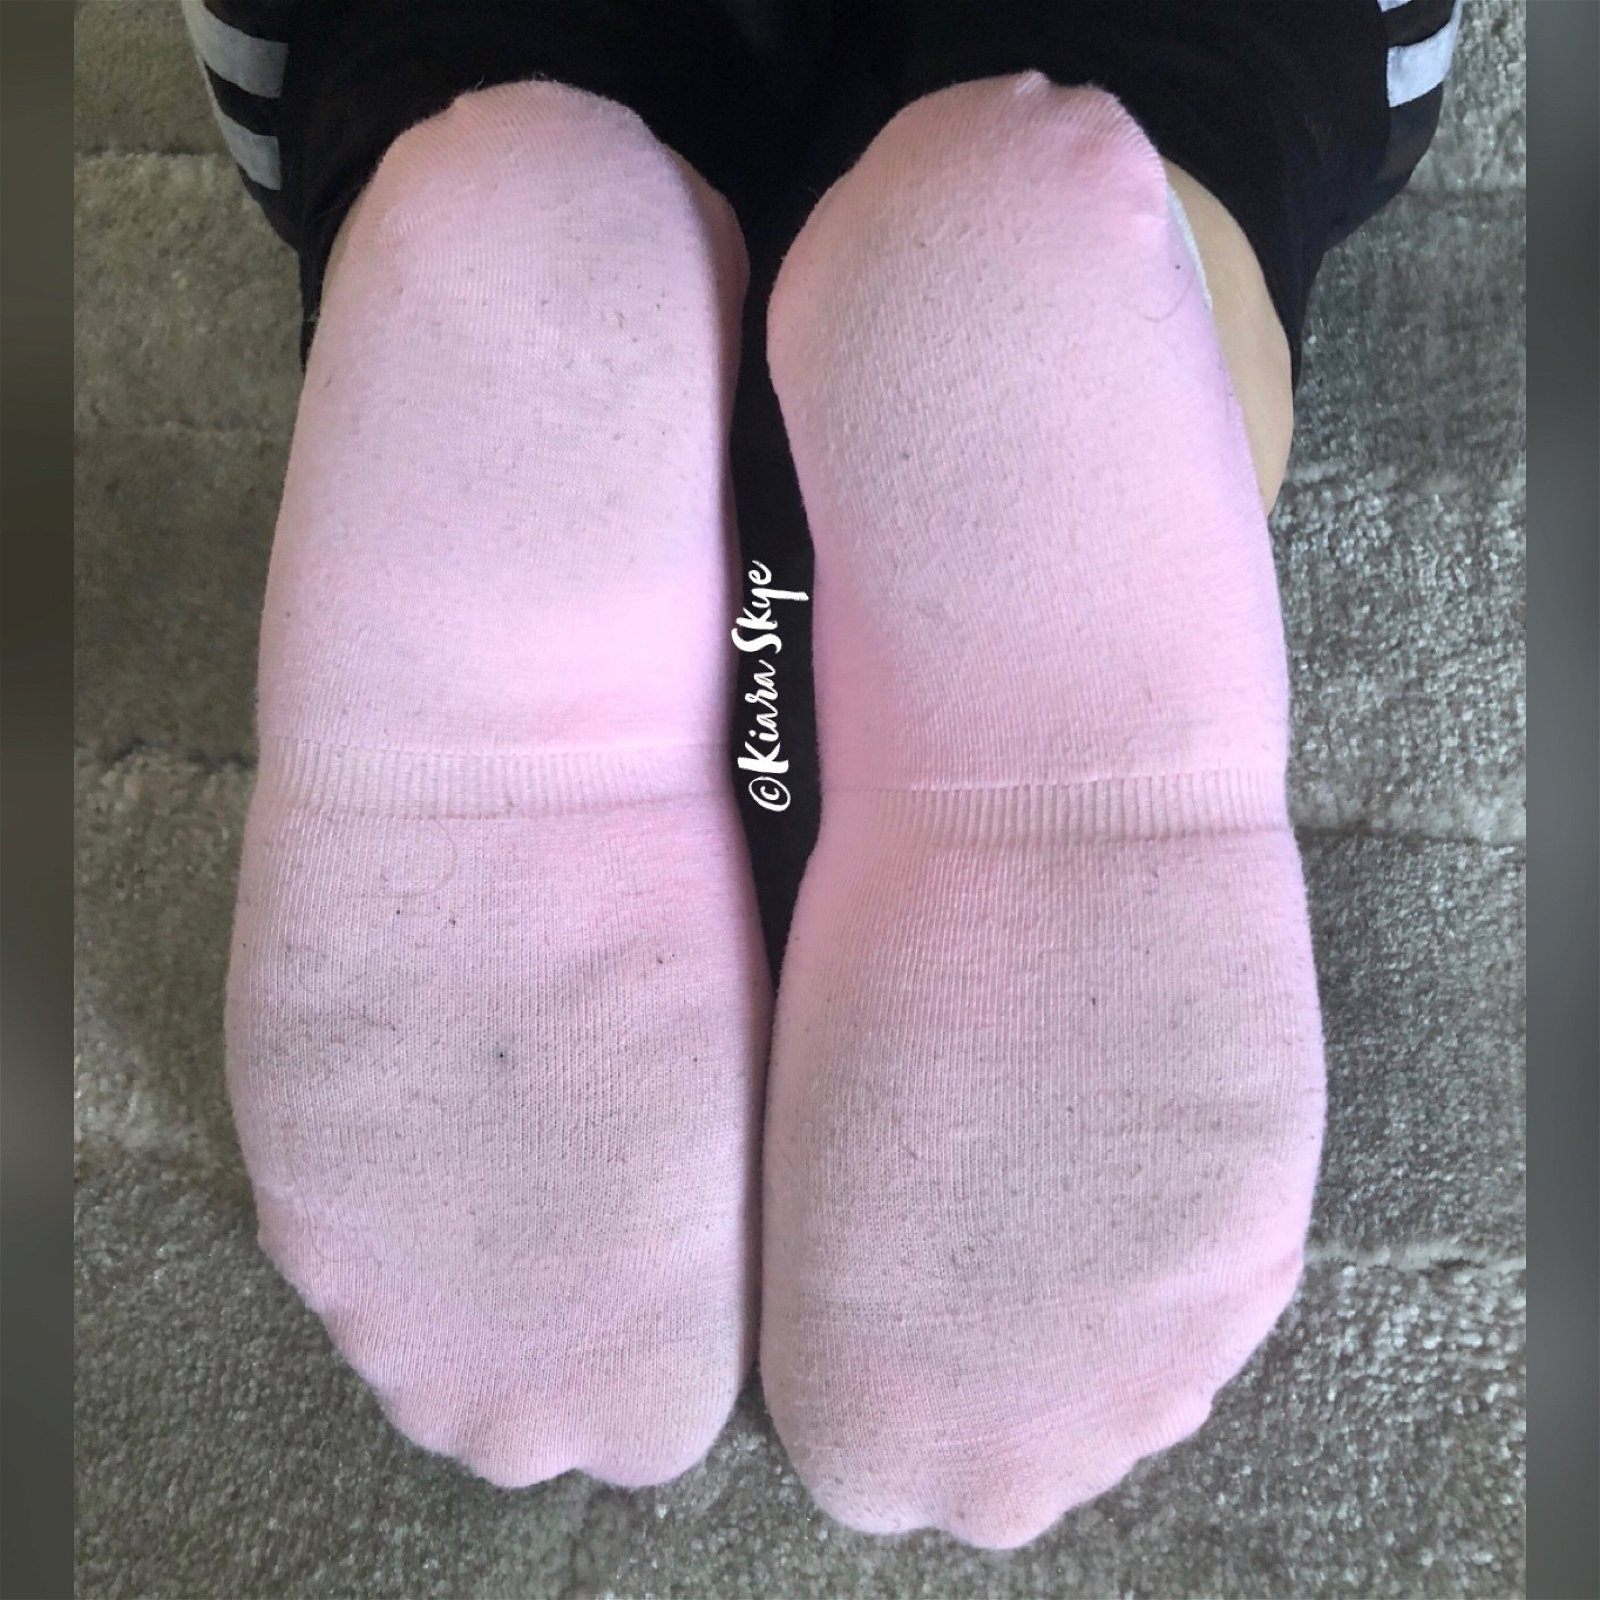 Watch the Photo by Kiara Skye with the username @KiaraSkye, who is a star user, posted on April 5, 2019. The post is about the topic Hot Girls in Socks. and the text says '🧦Pink #stinky #smelly #peds! #Sock lovers!.. you can bid on these dirty #wornsocks today! 💕 #feet #footfetish #smallfeet

🔗Link: http://www.ebanned.net/cgi-bin/auction/auction.cgi?category=wclothing23&item=1554847877'